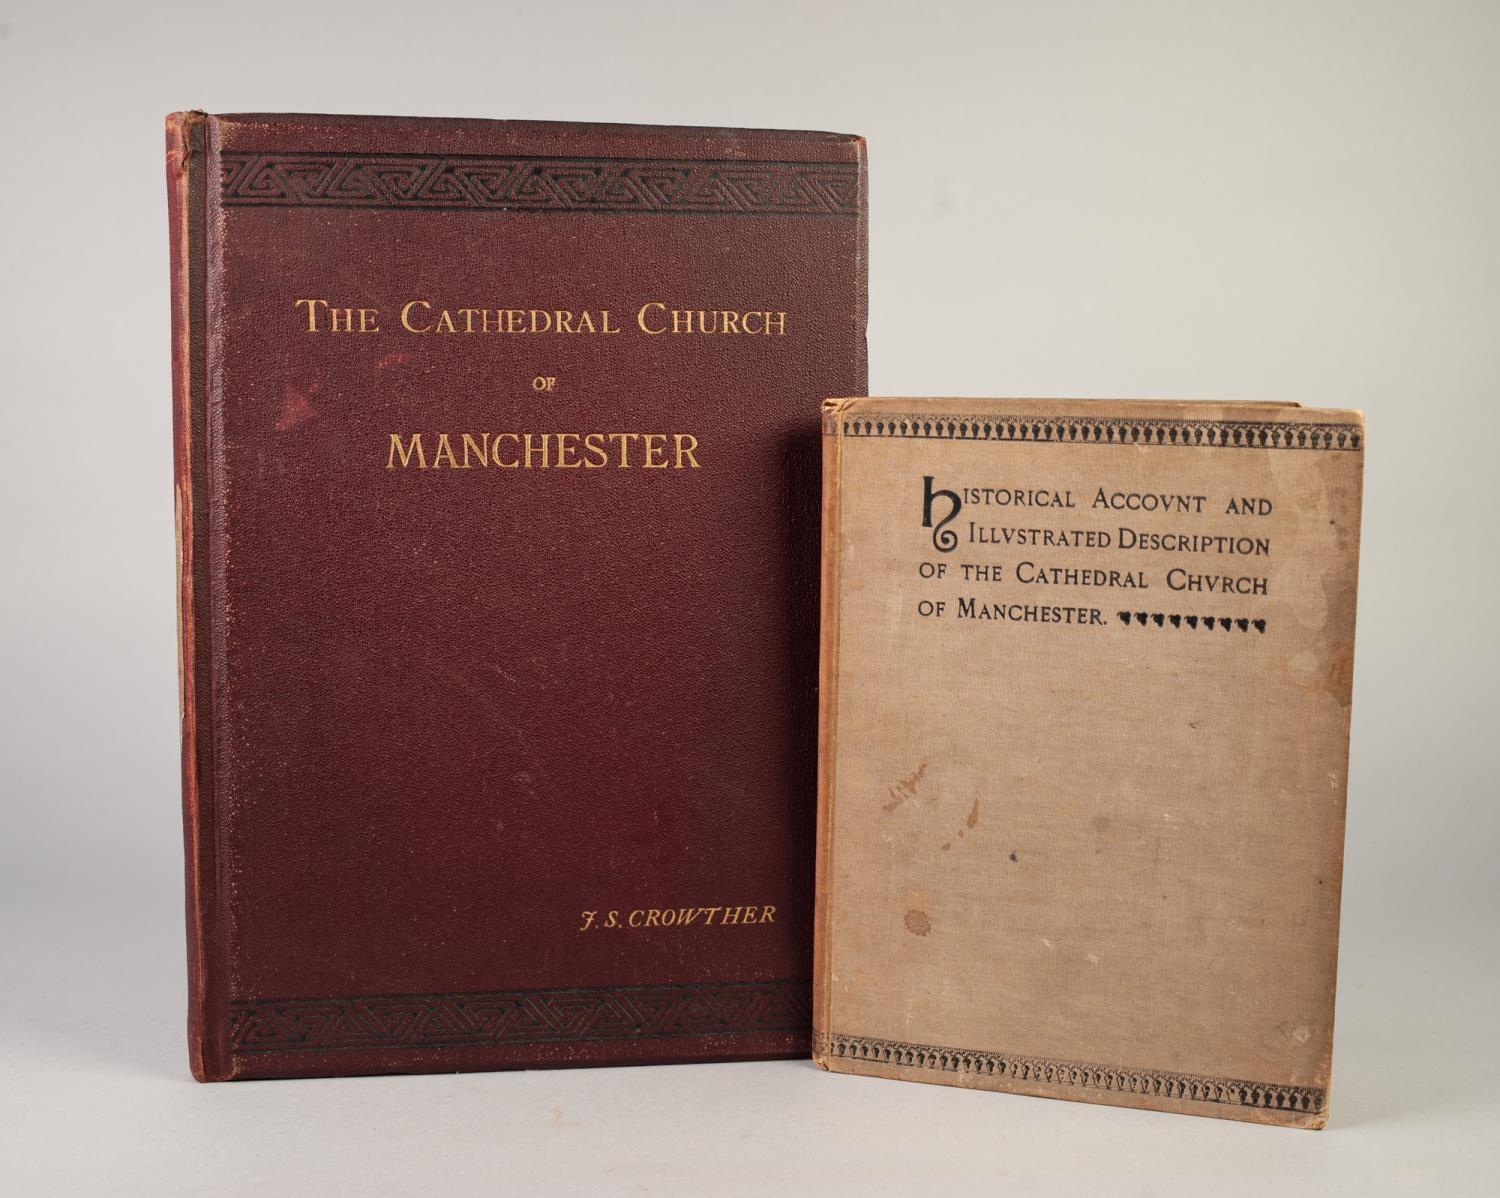 CROWTHER, AN ARCHITECUTRAL HISTORY OF THE CATHEDRAL CHURCH OF MANCHESTER, edited by F Renaud,